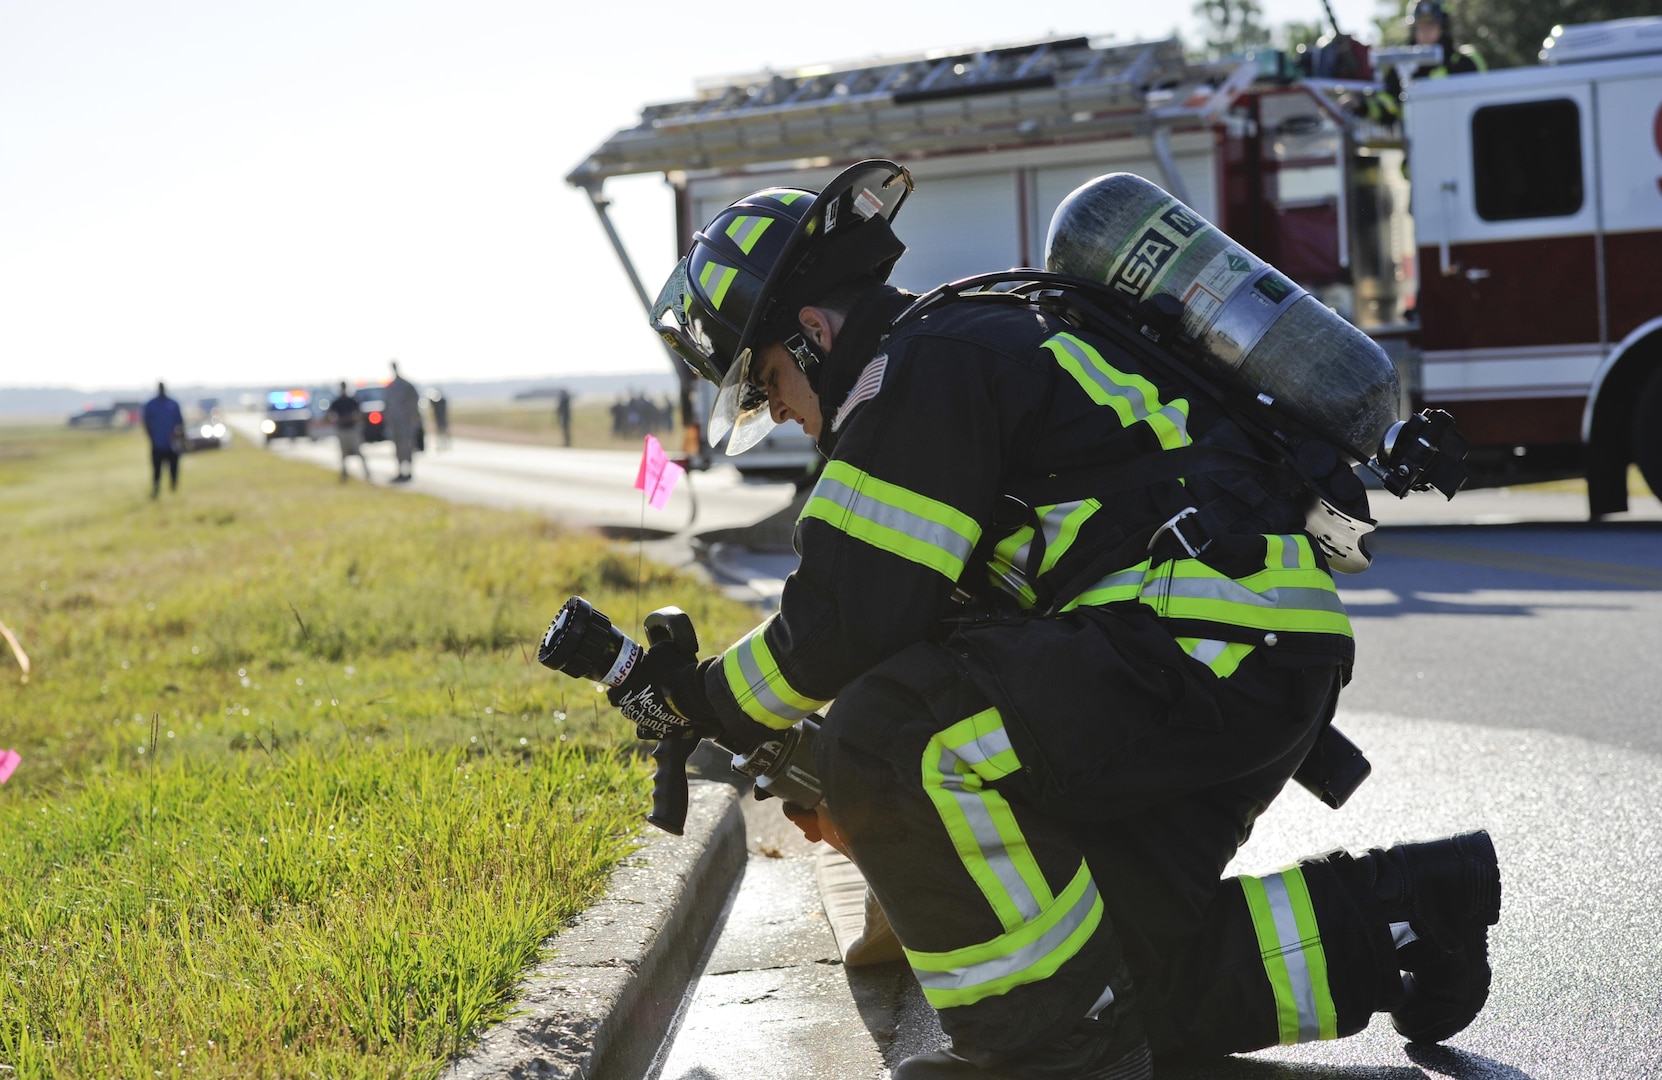 U.S. Air Force Senior Airman Cody Gadsbyhull, 325th Civil Engineer Squadron fire protection specialist, places a fire hose in a drainage ditch during a fuel spill exercise near the 325th Logistics Readiness Squadron fuel depot at Tyndall Air Force Base, Fla., Oct. 13, 2016. The purpose of the exercise was to train Airmen to respond to a simulated fuel spill in a safe and controlled environment. (U.S. Air Force photo by Senior Airman Solomon Cook/Released)  